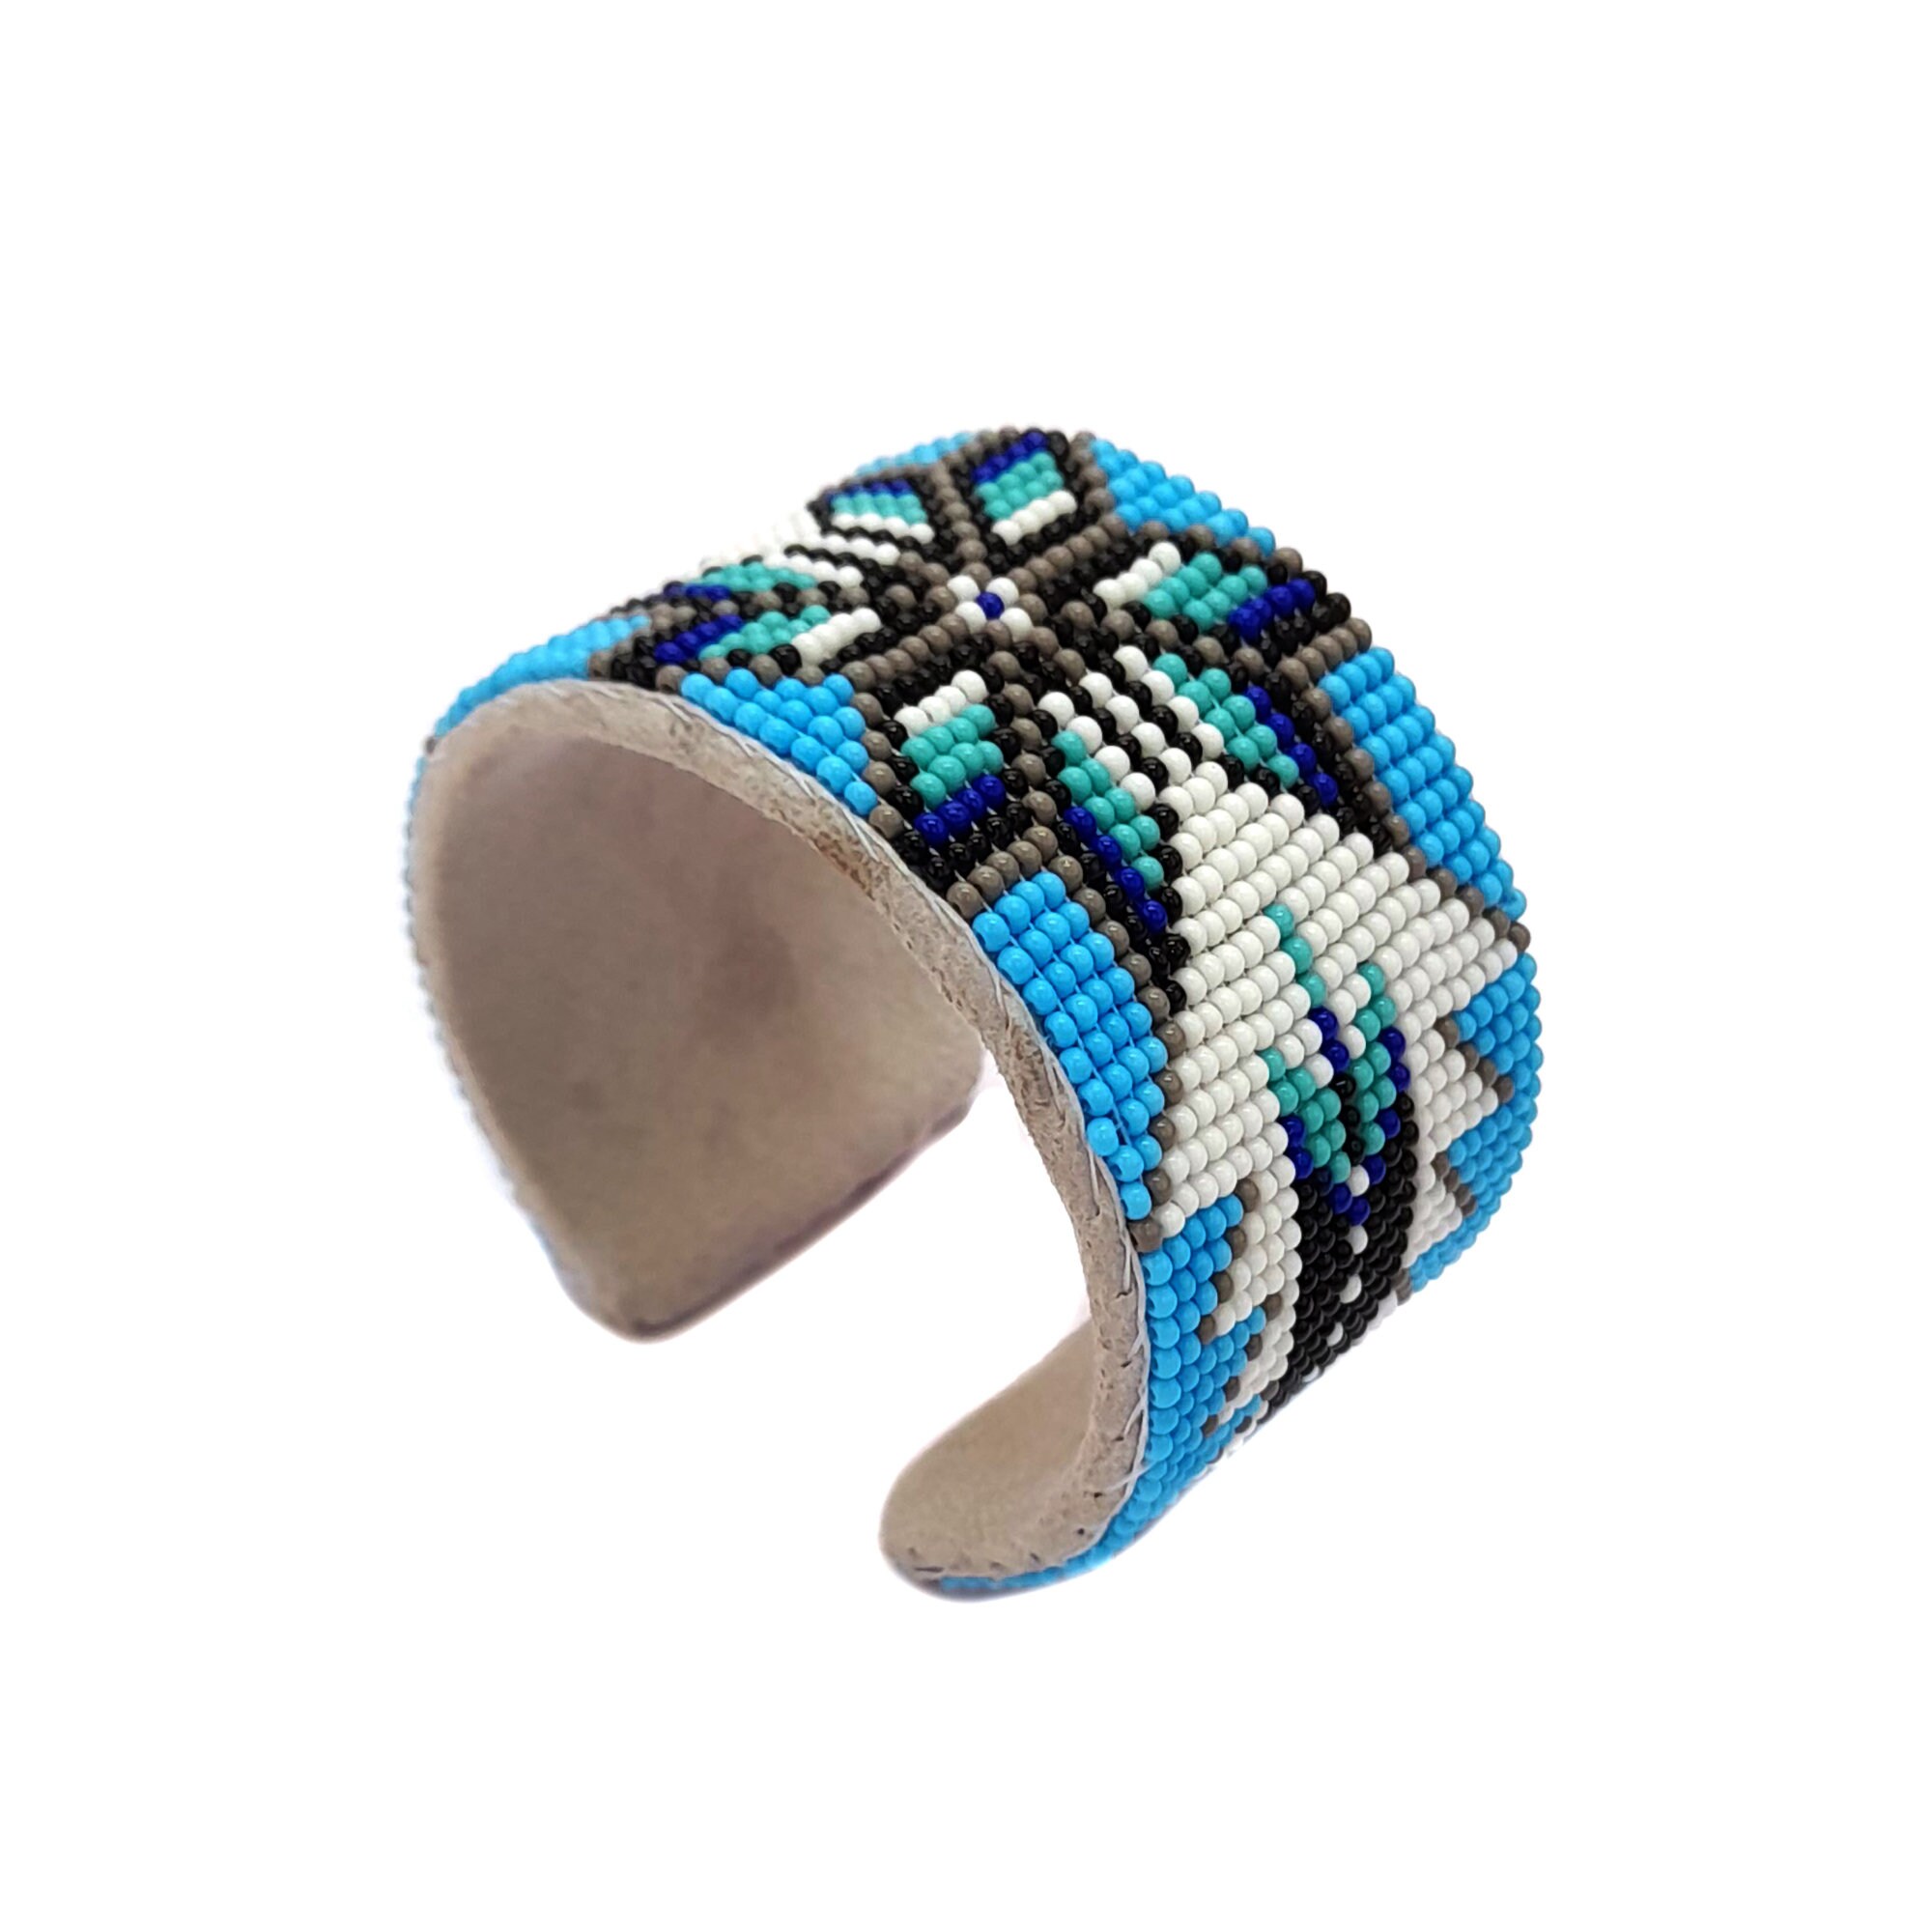 colorful beaded cuff bracelet with turquoise blue and brig… | Flickr